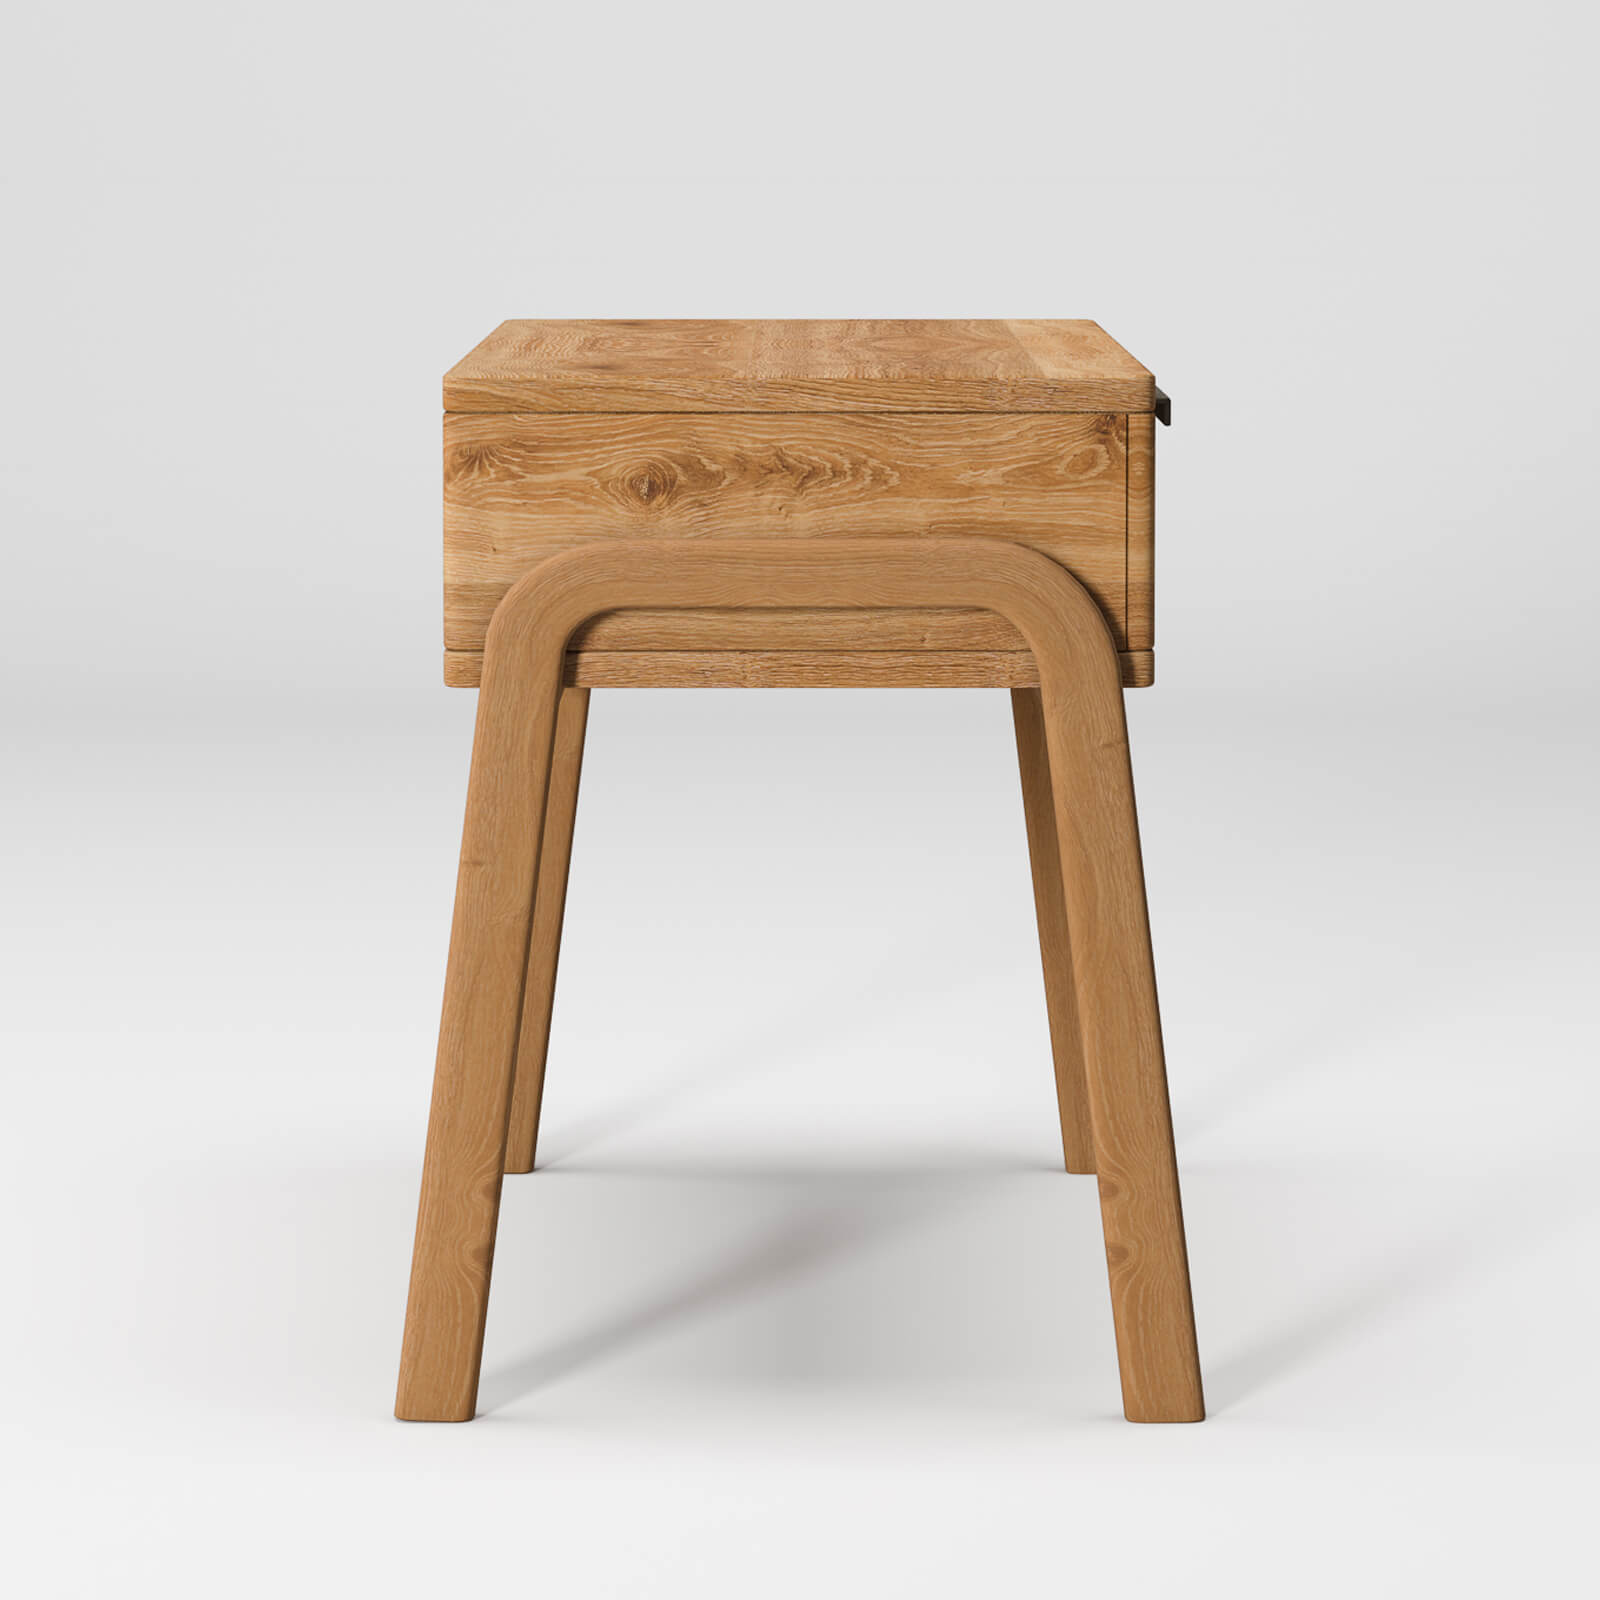 Side View 3D Rendering for Wooden Nightstand